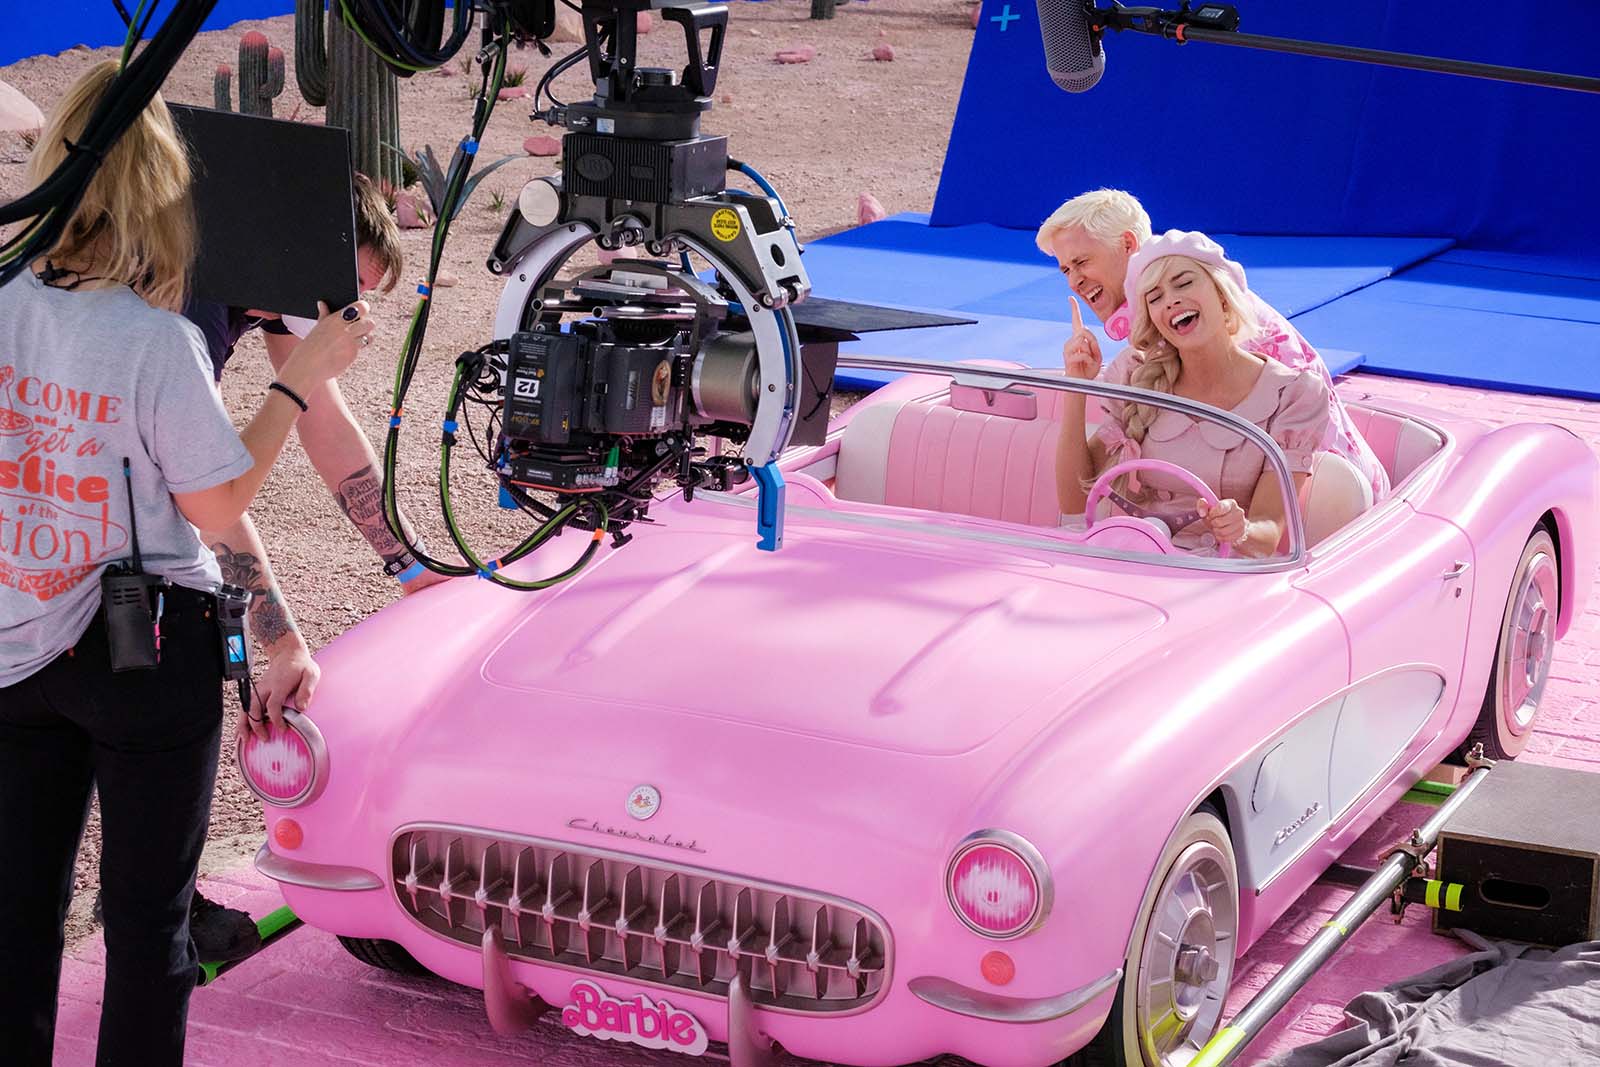 Chevrolet was among several marketing partners in the Barbie movie. Image © Warner Bros.